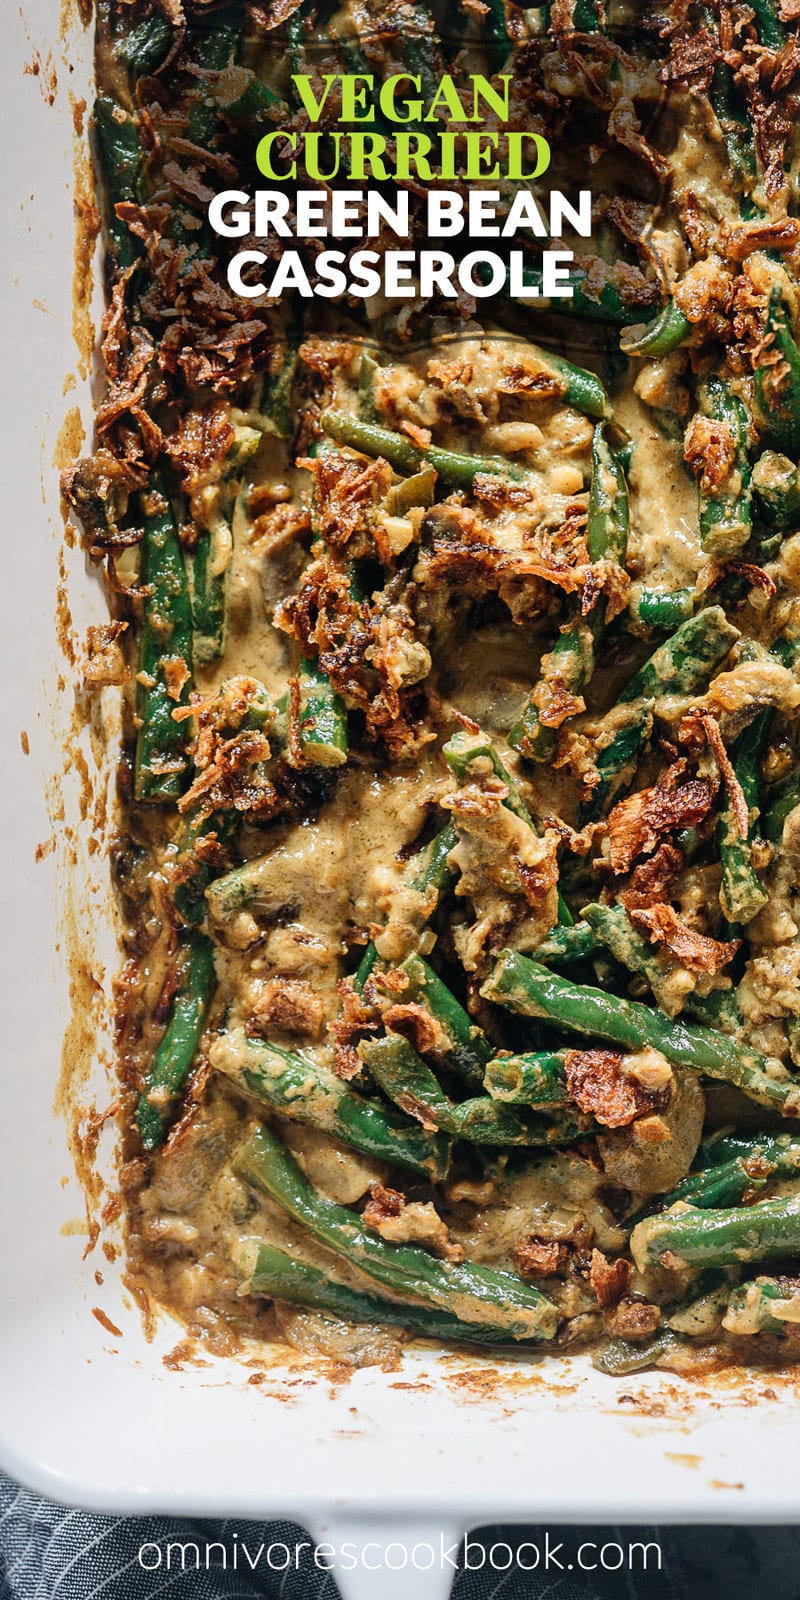 Curried Vegan Green Bean Casserole | An easy homemade vegan Thanksgiving dish that has all the creaminess of traditional creamed beans, but with the bold taste of fresh wholesome ingredients and Indian-inspired aromatics. It’s healthier than the traditional version and tastes even better. {Gluten-Free}